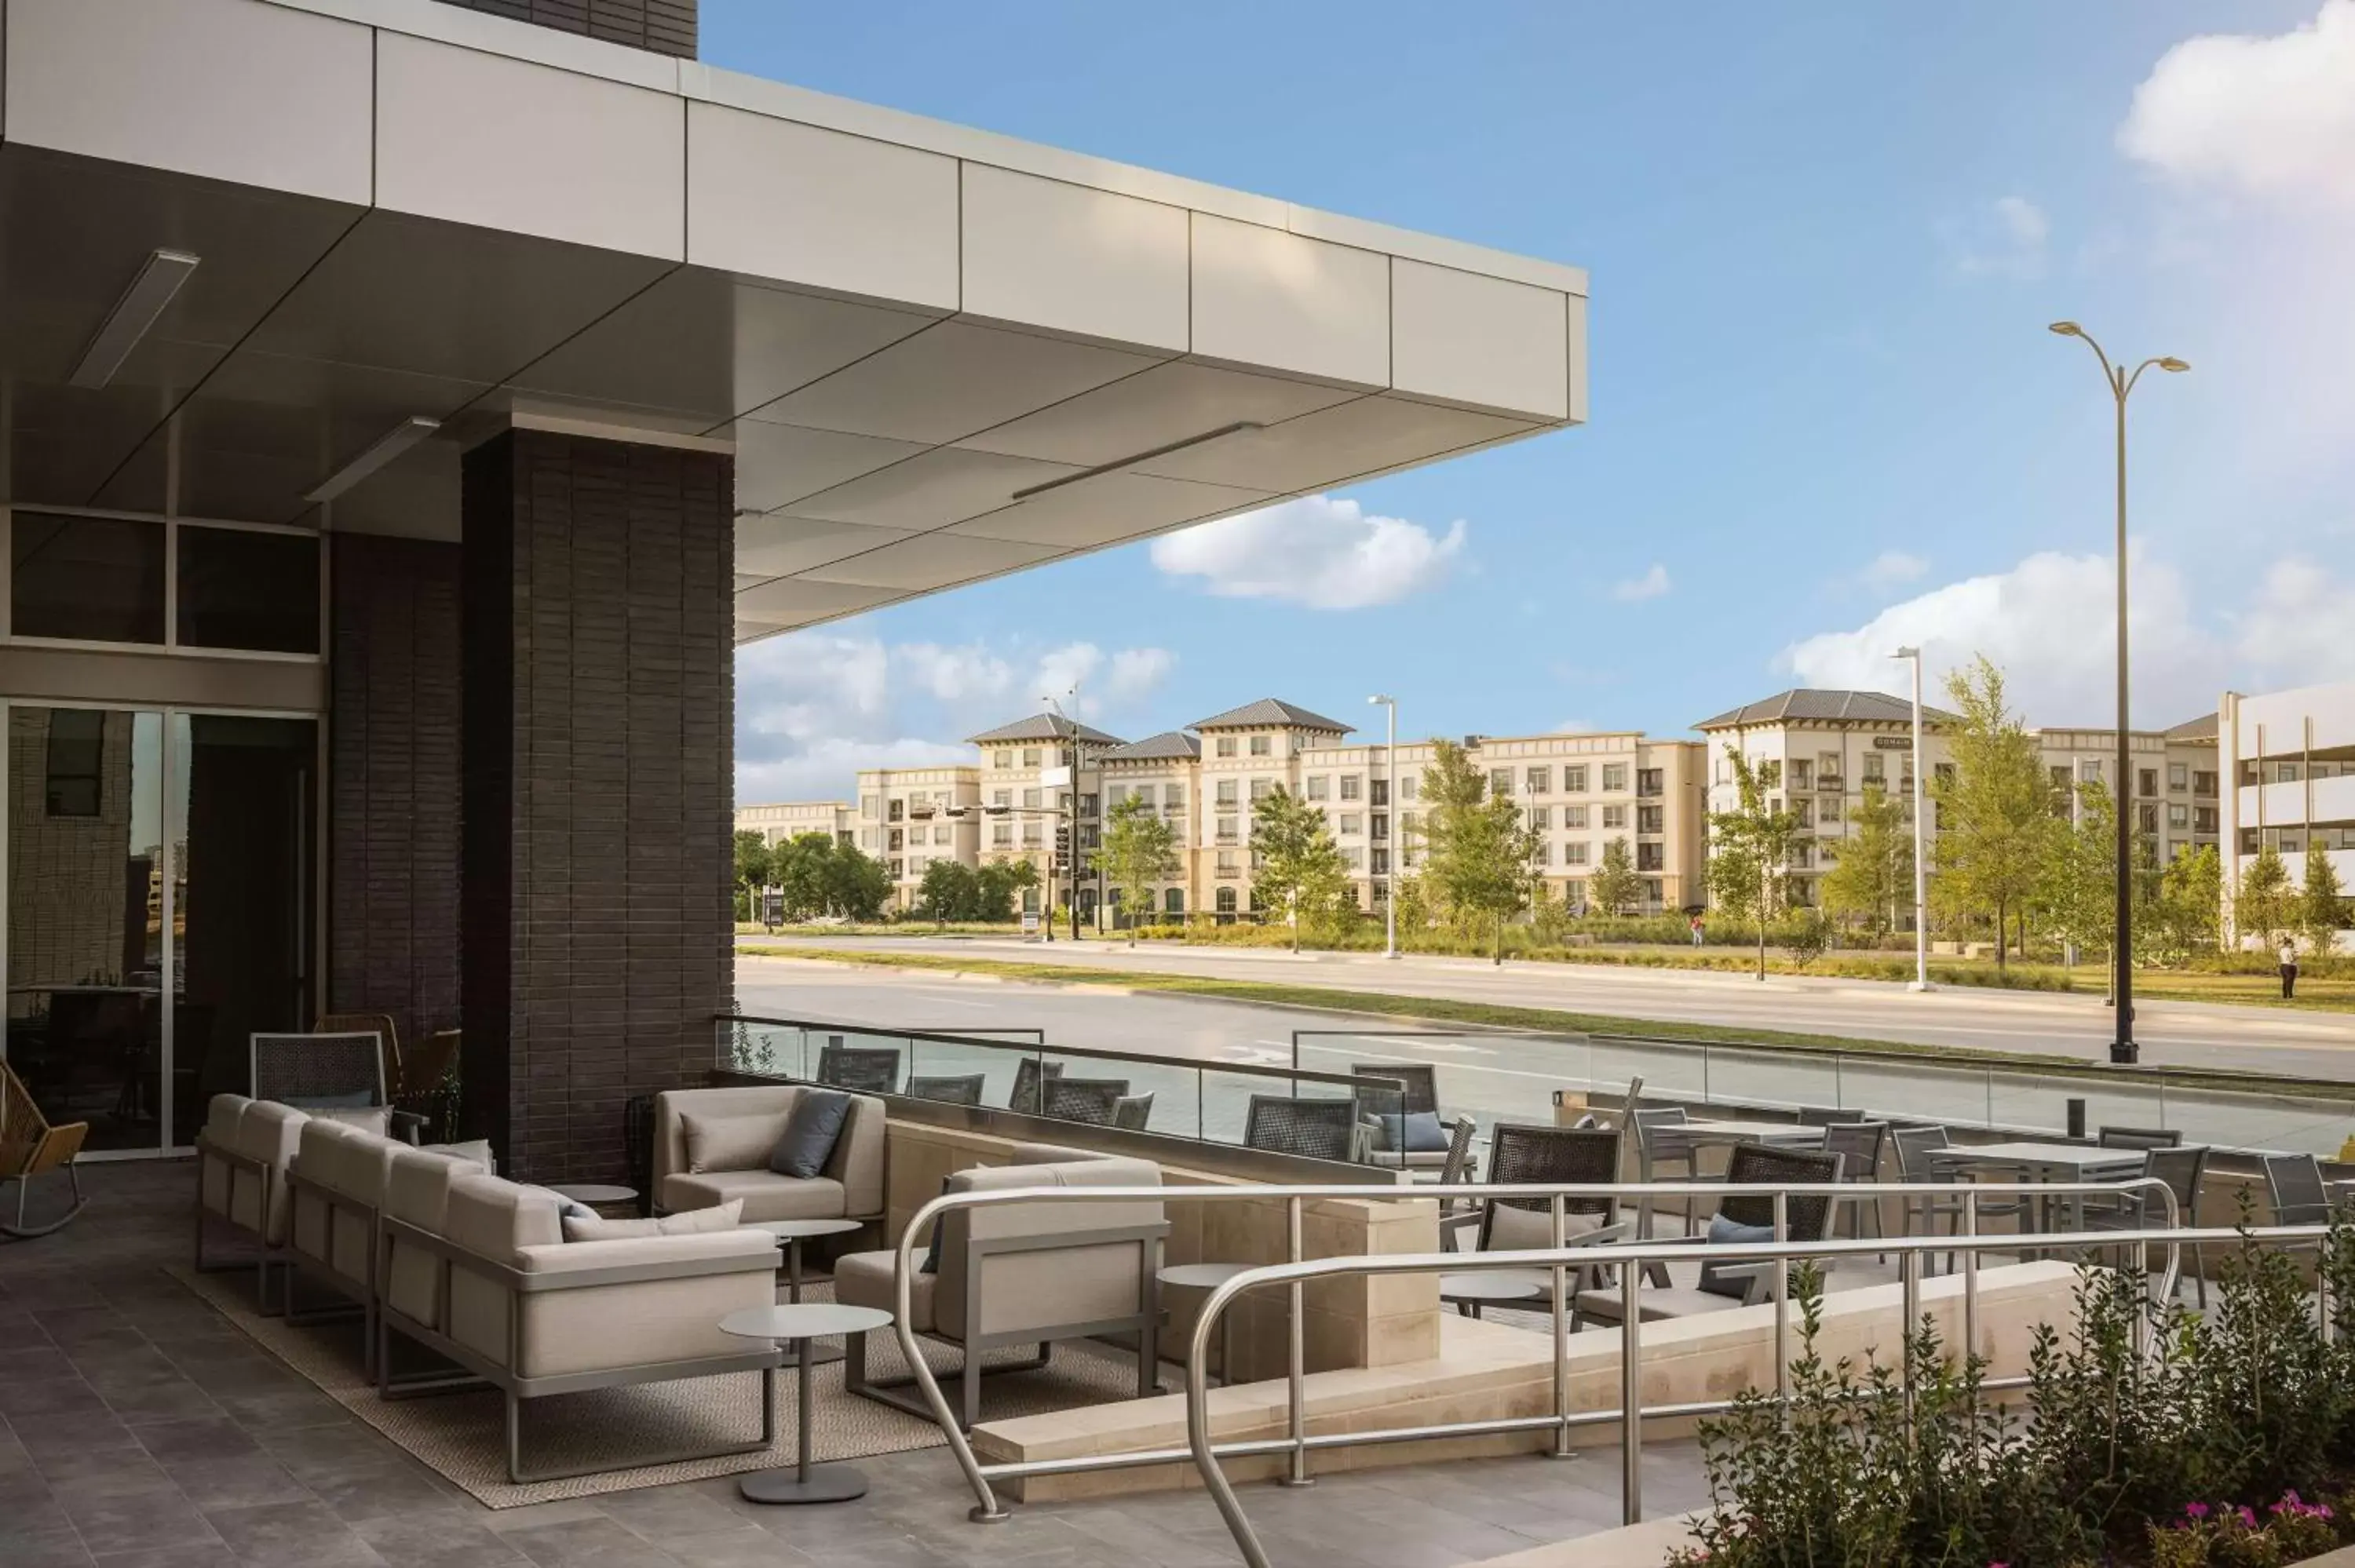 Property building in Canopy By Hilton Dallas Frisco Station